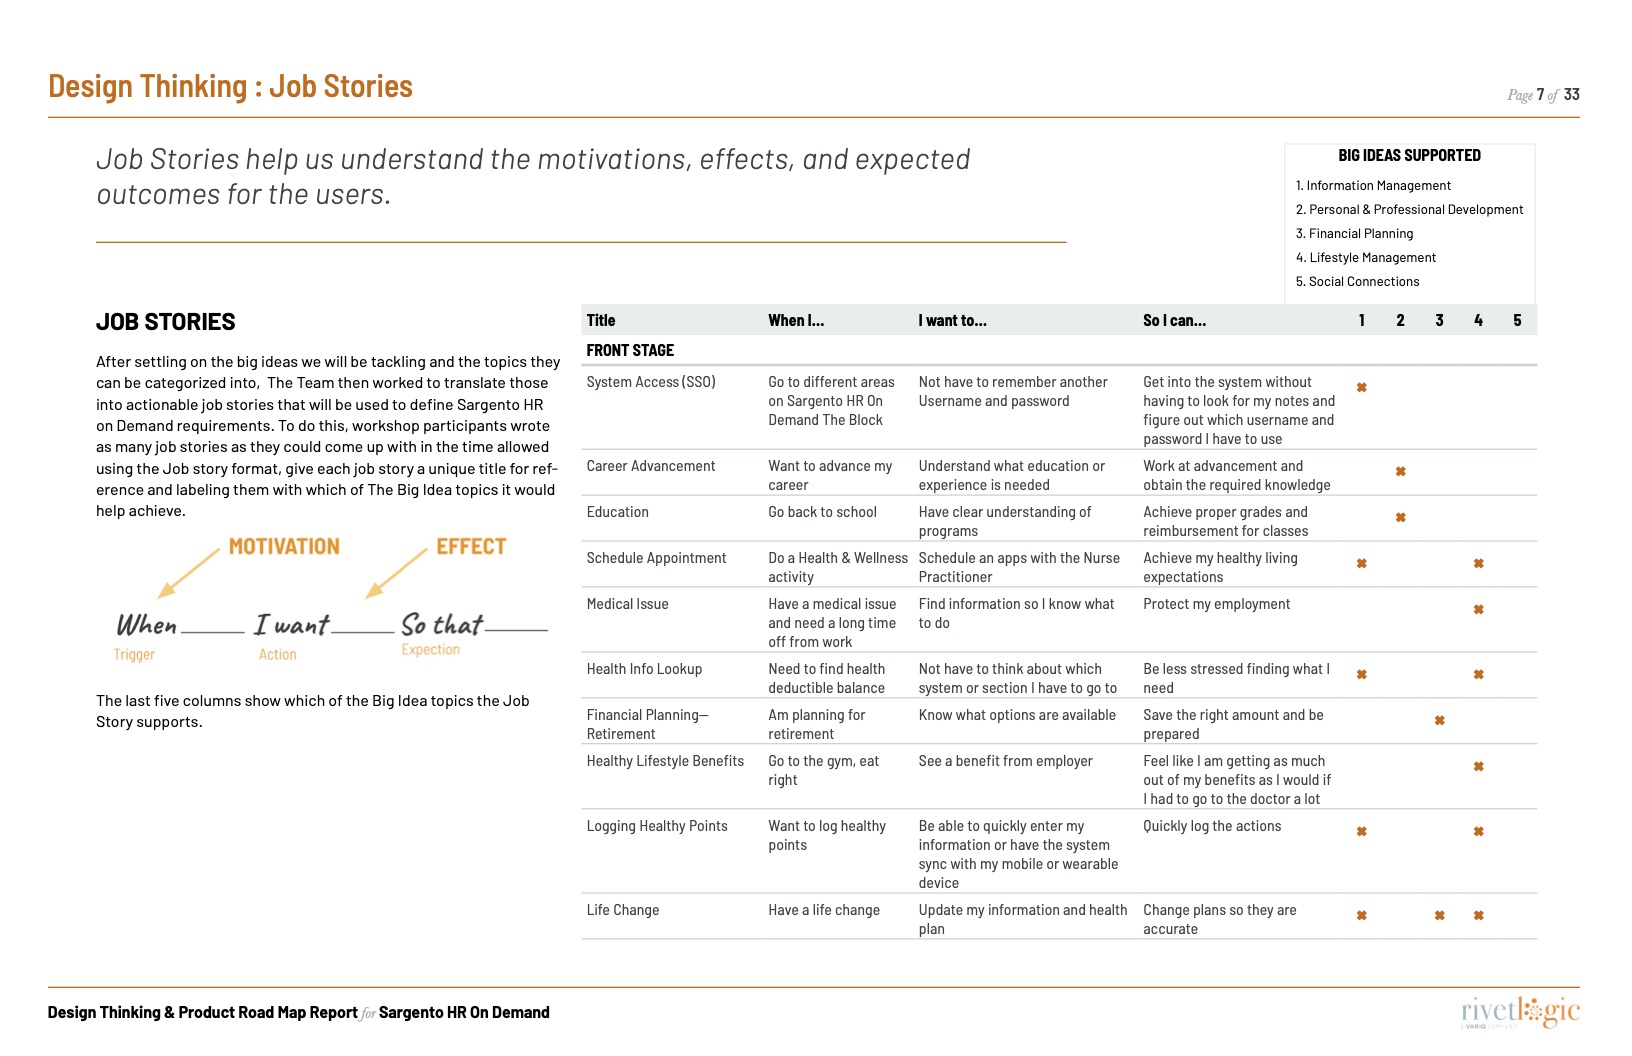 PAGE: Showing job stories developed during workshop.